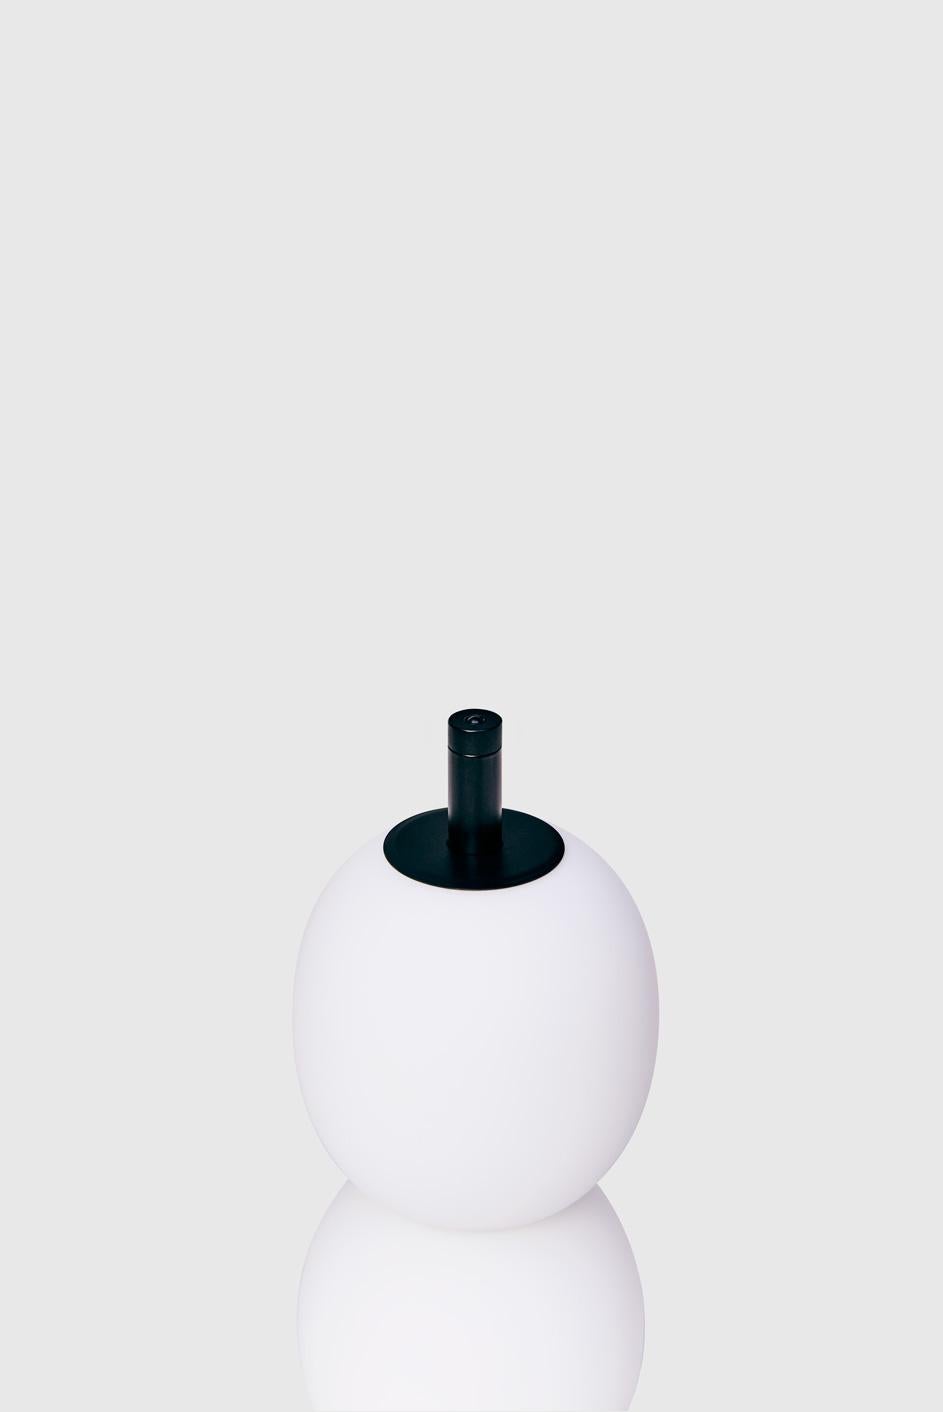 The Mainkai table lamp by Sebastian Herkner matches his playful shapes with sophisticated materials. The lamp’s integrated button on the top stem dims the glow of its hand blown glass globes. The LED light has a balanced color temperature of 2700K